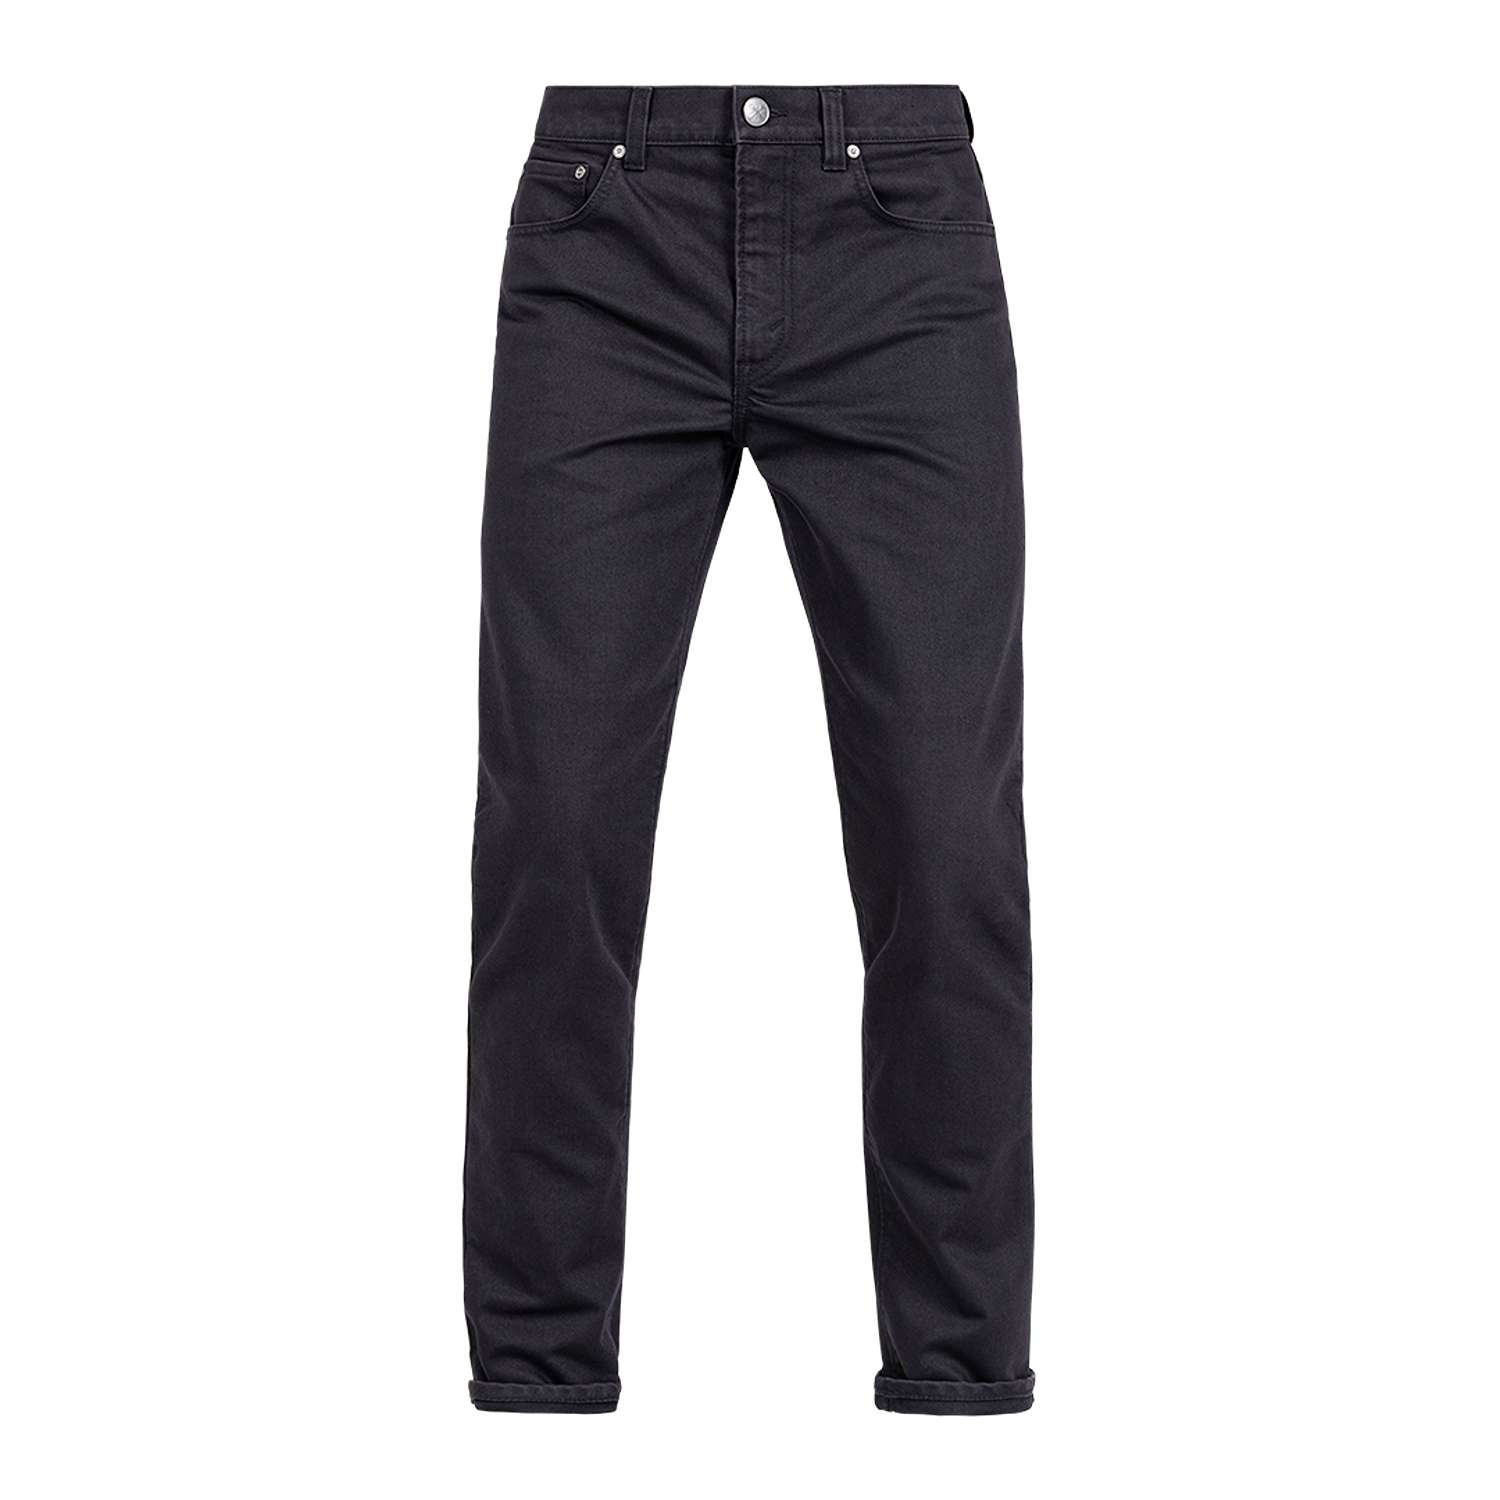 Image of John Doe Classic Tapered Jeans Black Black Taille W36/L34